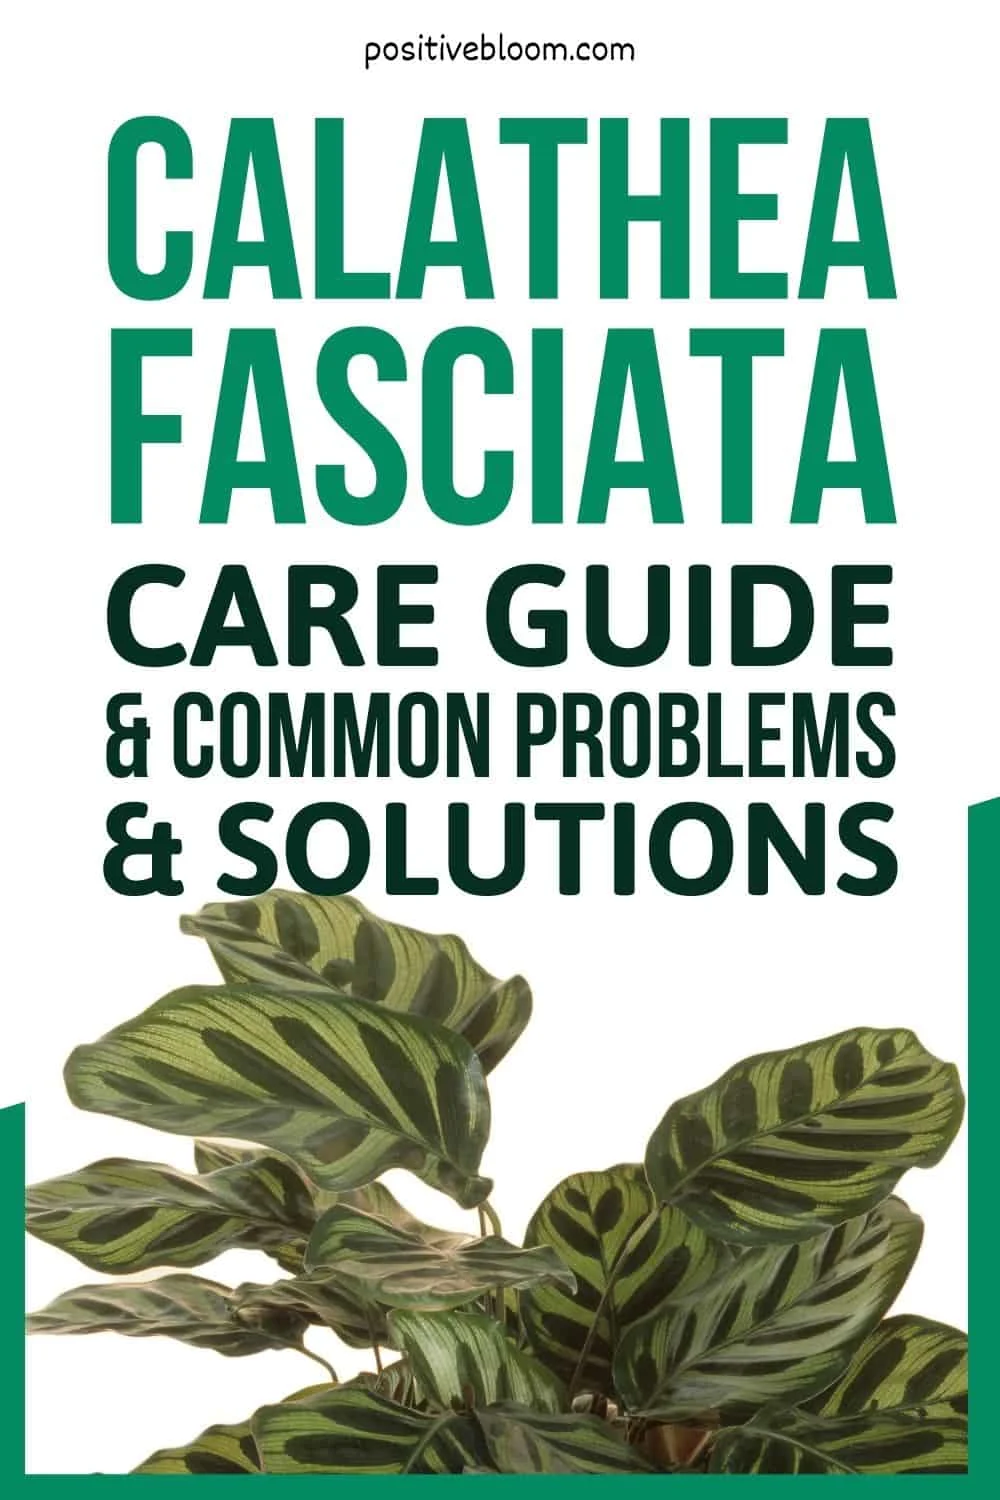 Calathea Fasciata Care Guide, And Common Problems & Solutions Pinterest